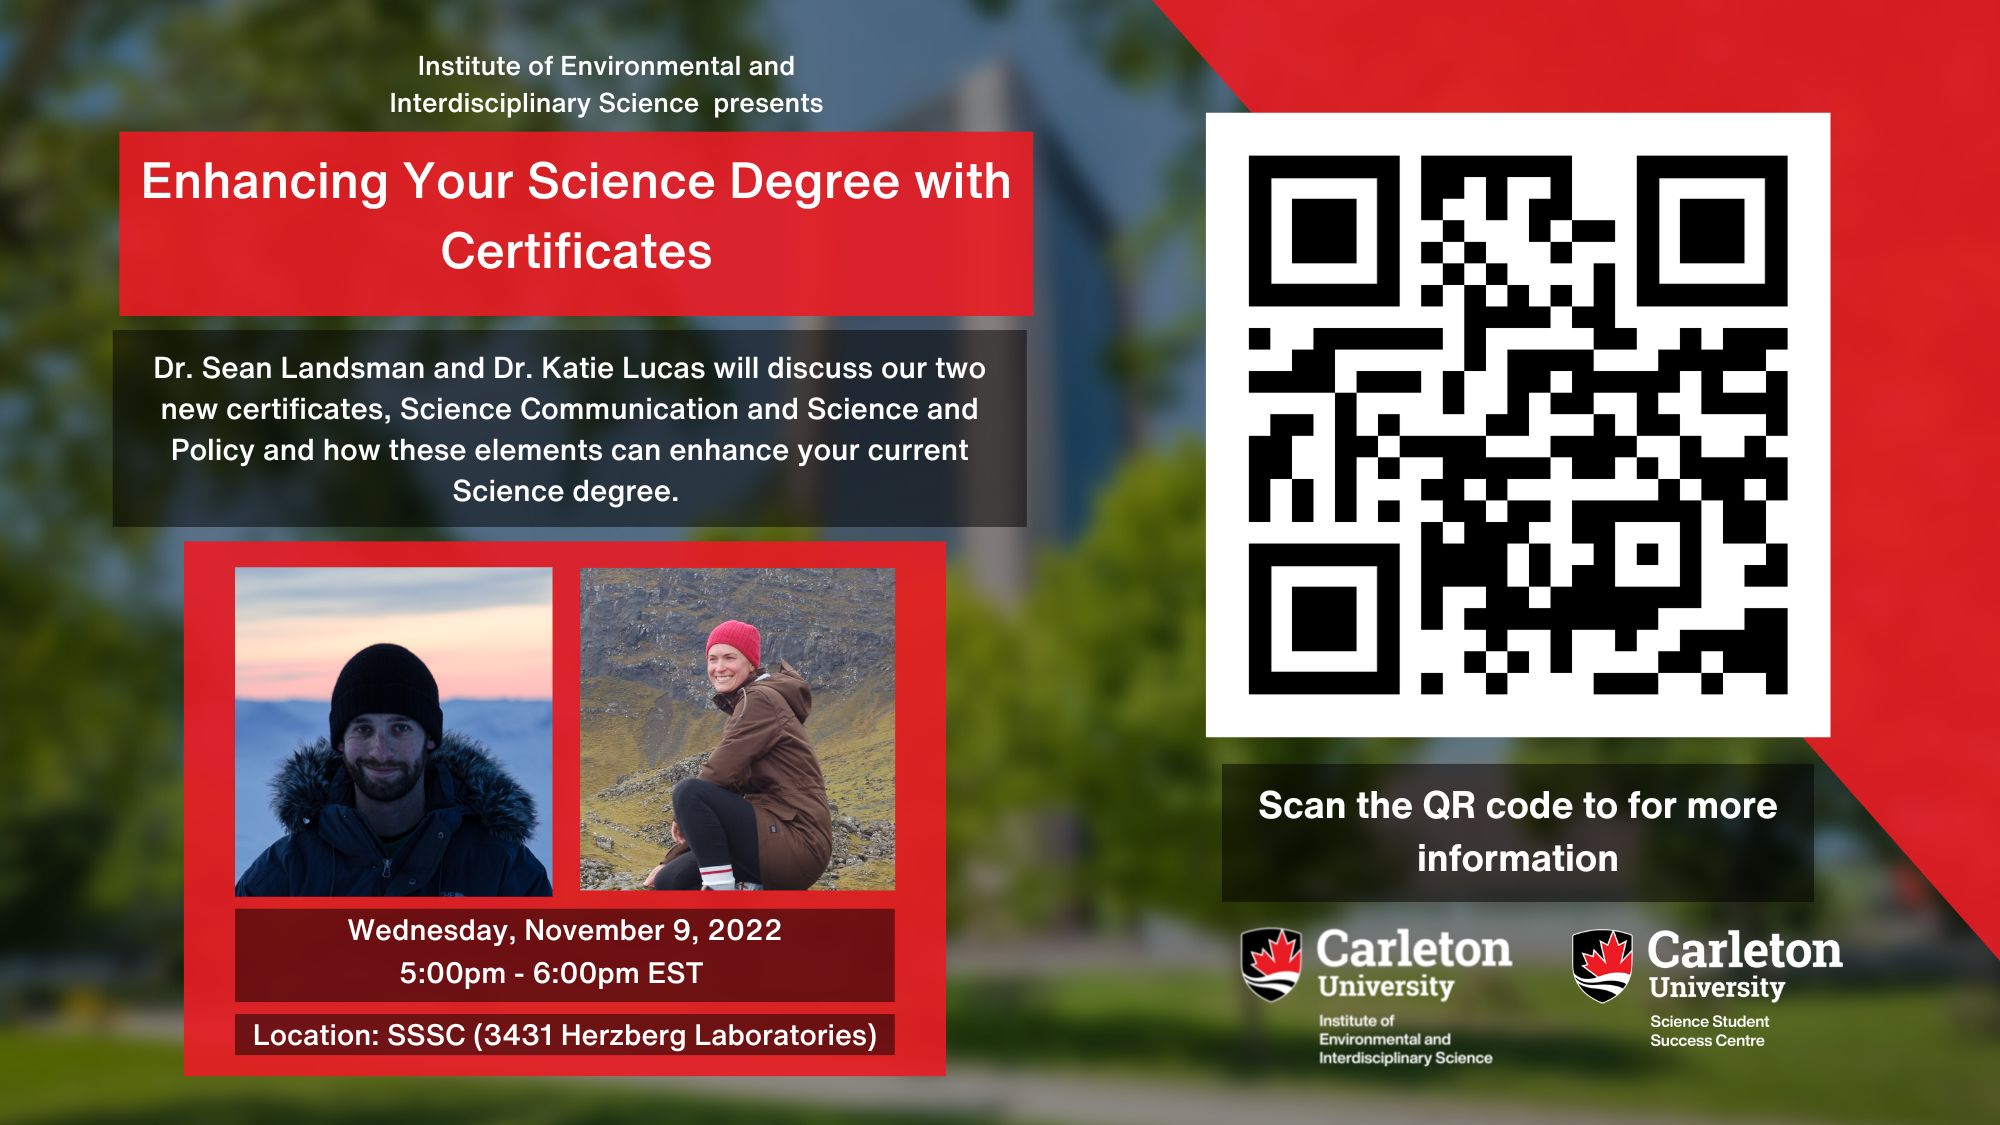 Poster with text. The text reads "Institute of Environmental and Interdisciplinary Science presents Enhancing Your Science Degree with Certificates. Dr. Sean Landsman and Dr. Katie Lucas will discuss our two new certificates, Science Communication and Science and Policy and how these elements can enhance your current Science degree. Wednesday, November 9, 2022. 5:00pm - 6:00pm EDT. Location: SSSC (3431 Herzberg Laboratories). Scan the QR Code for more information. Carleton University, Institute of Environmental and Interdisciplinary Science . Carleton University, Science Student Success Centre."